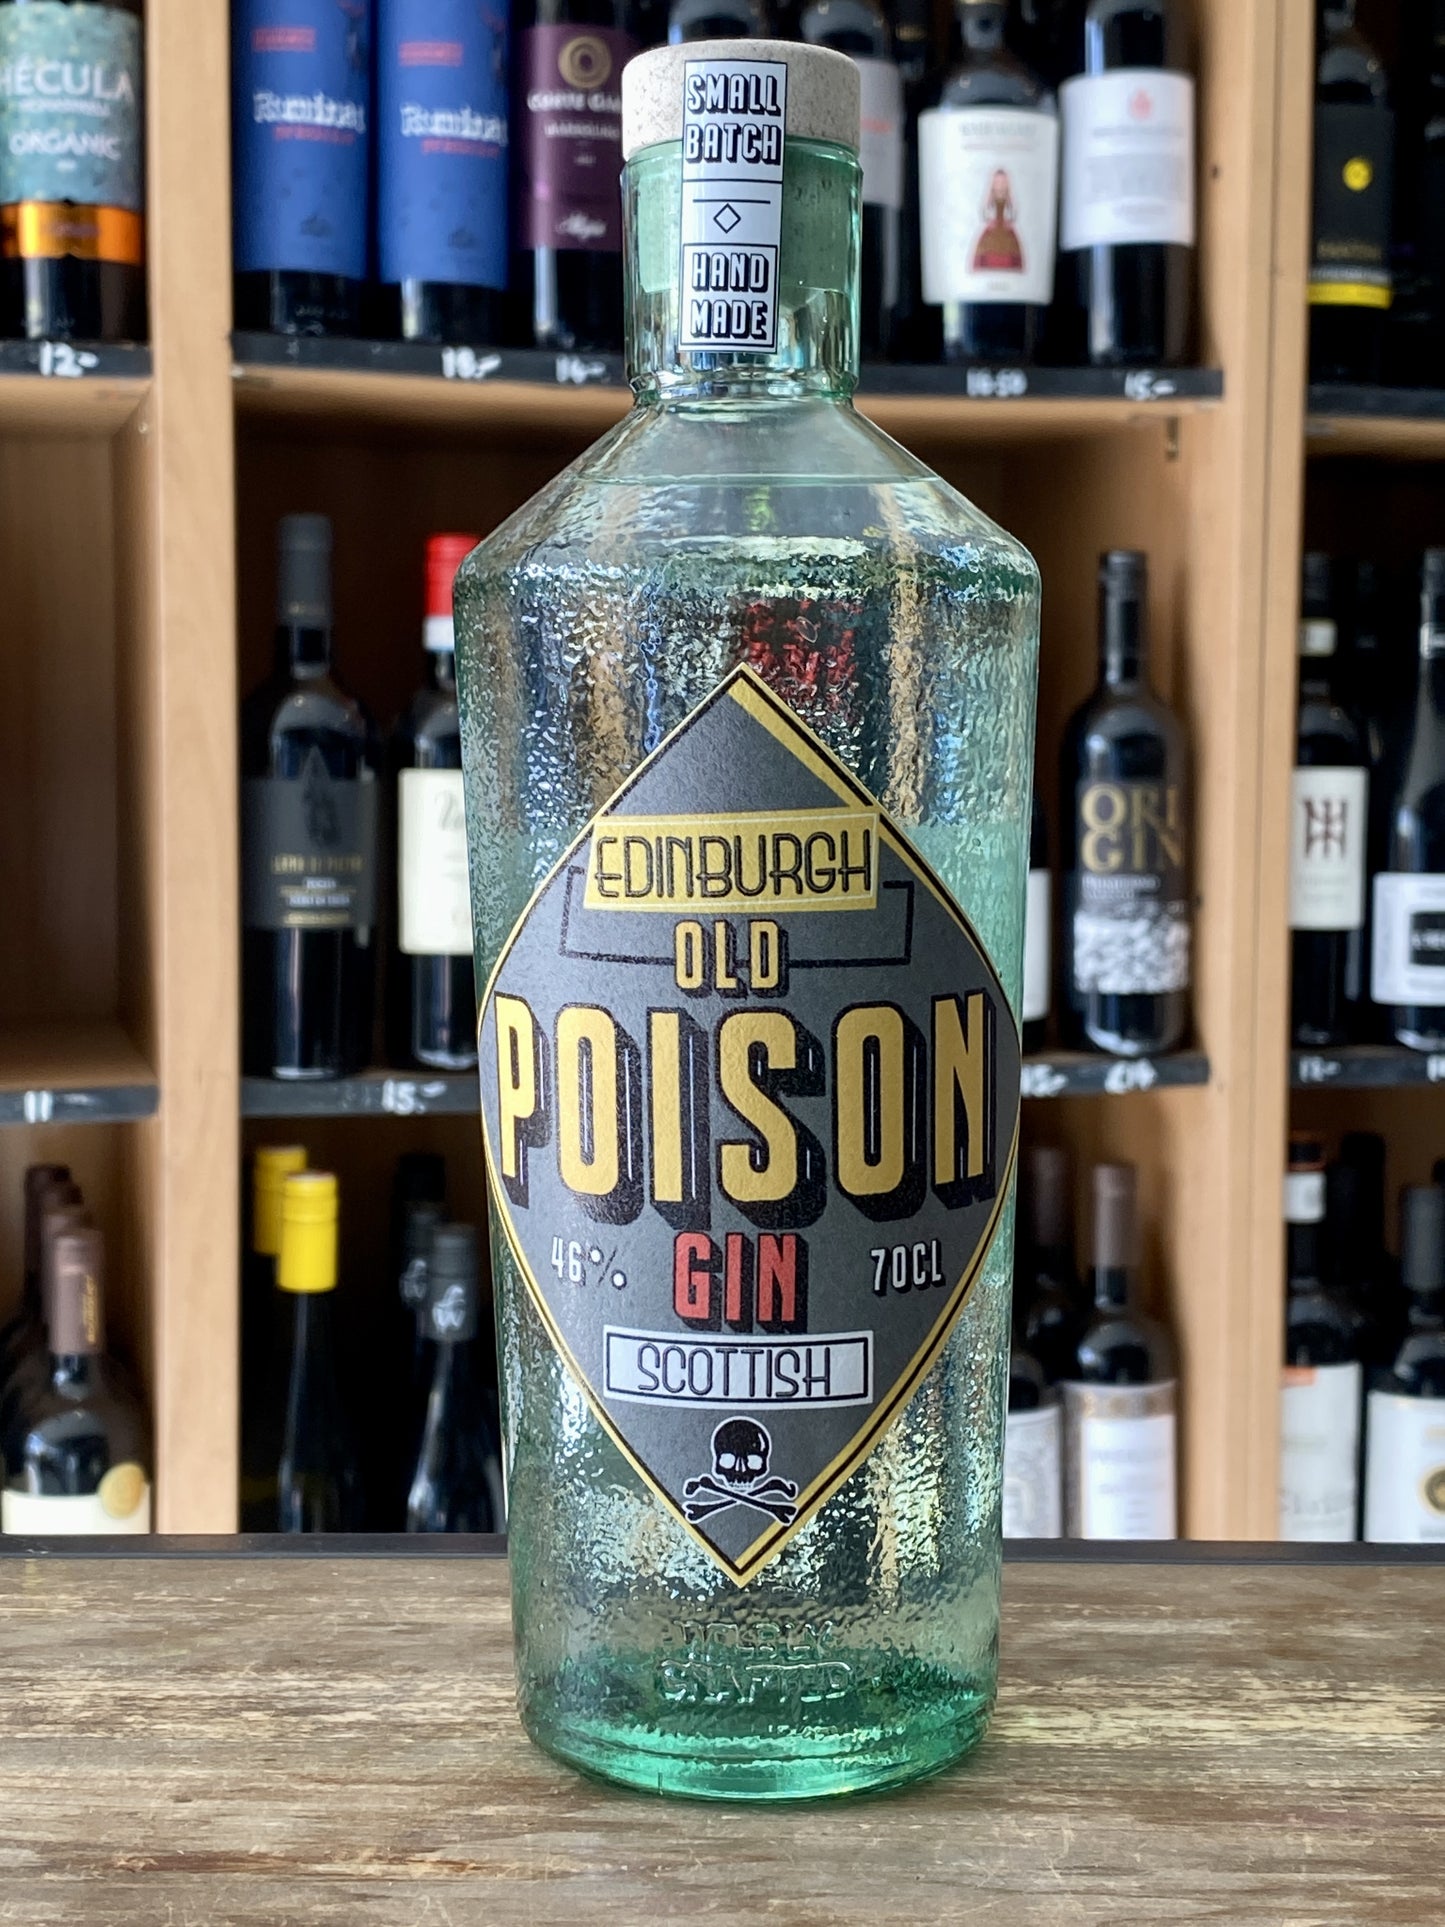 Old Poison Gin